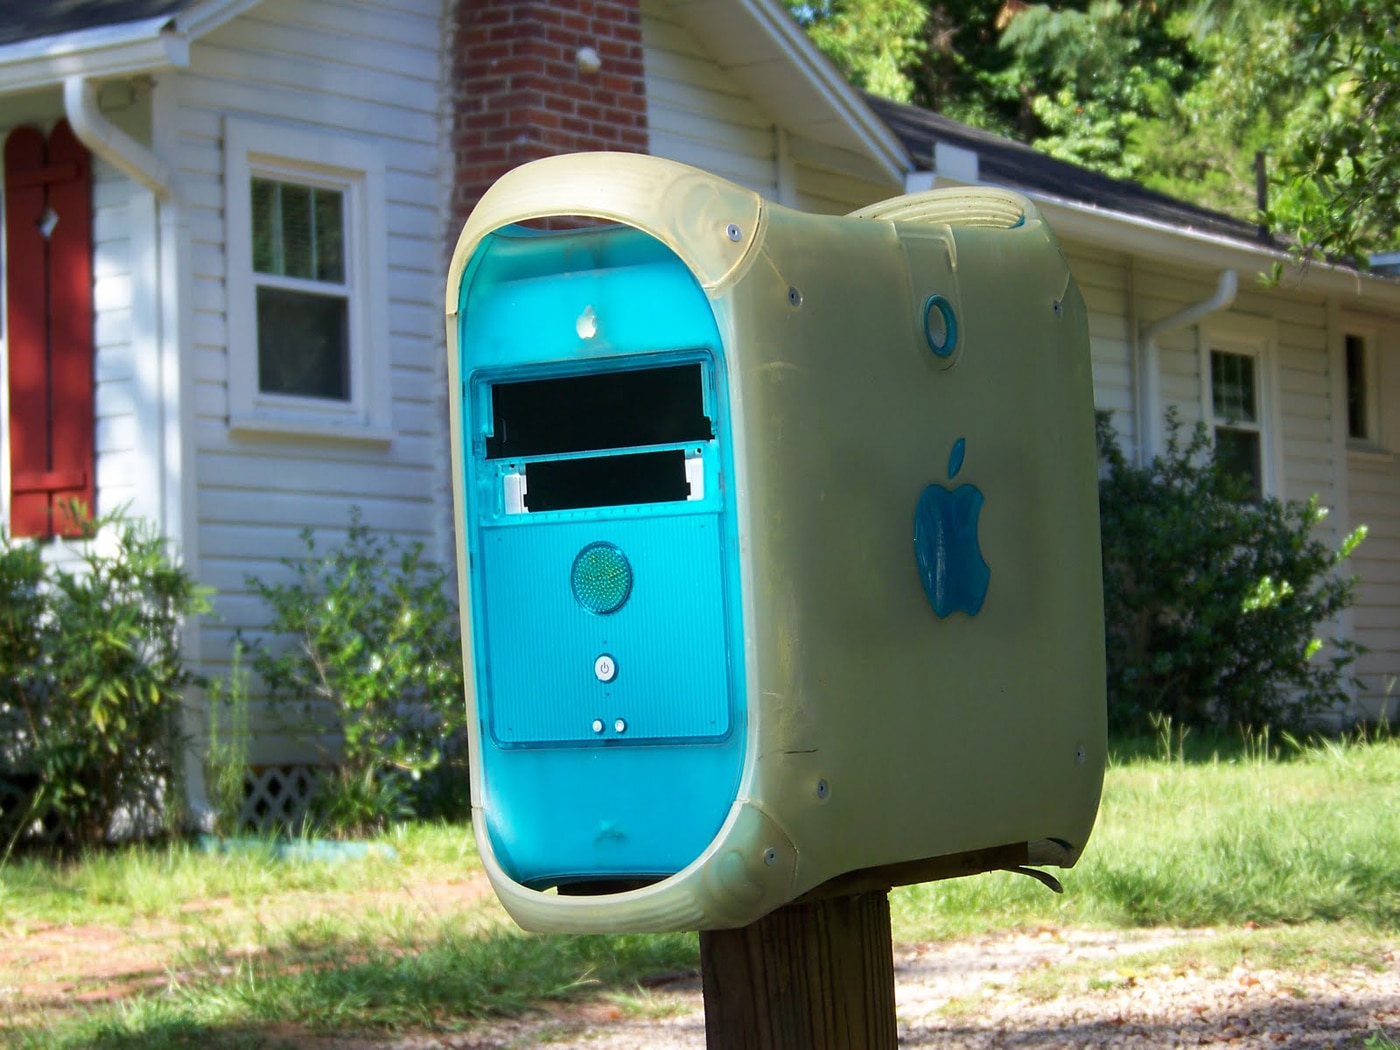 The Mac Mailbox…That’s One Way To Recycle Your Old Computer